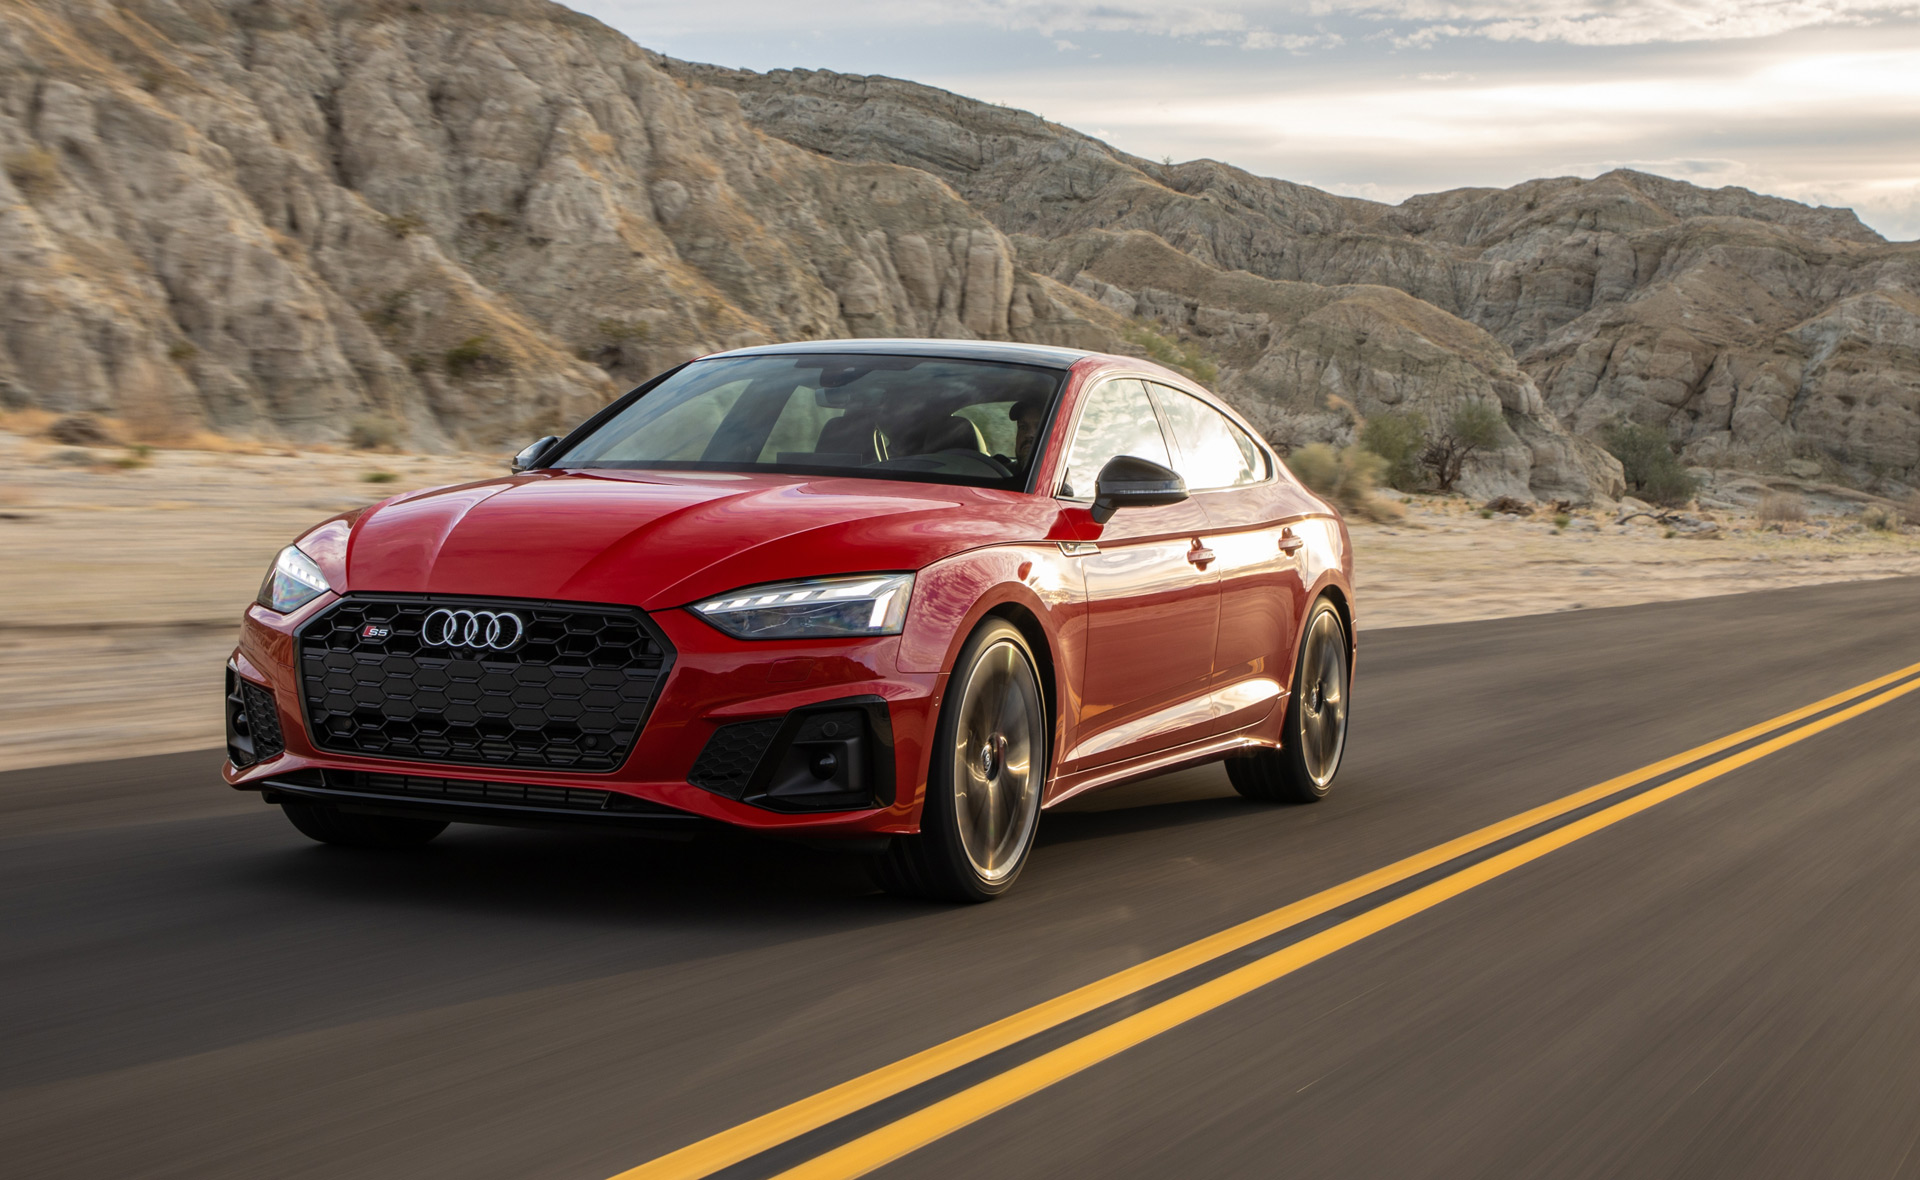 Audi A5 Sportback 2021 2021 Audi A5 Review Ratings Specs Prices And Photos The Car Connection